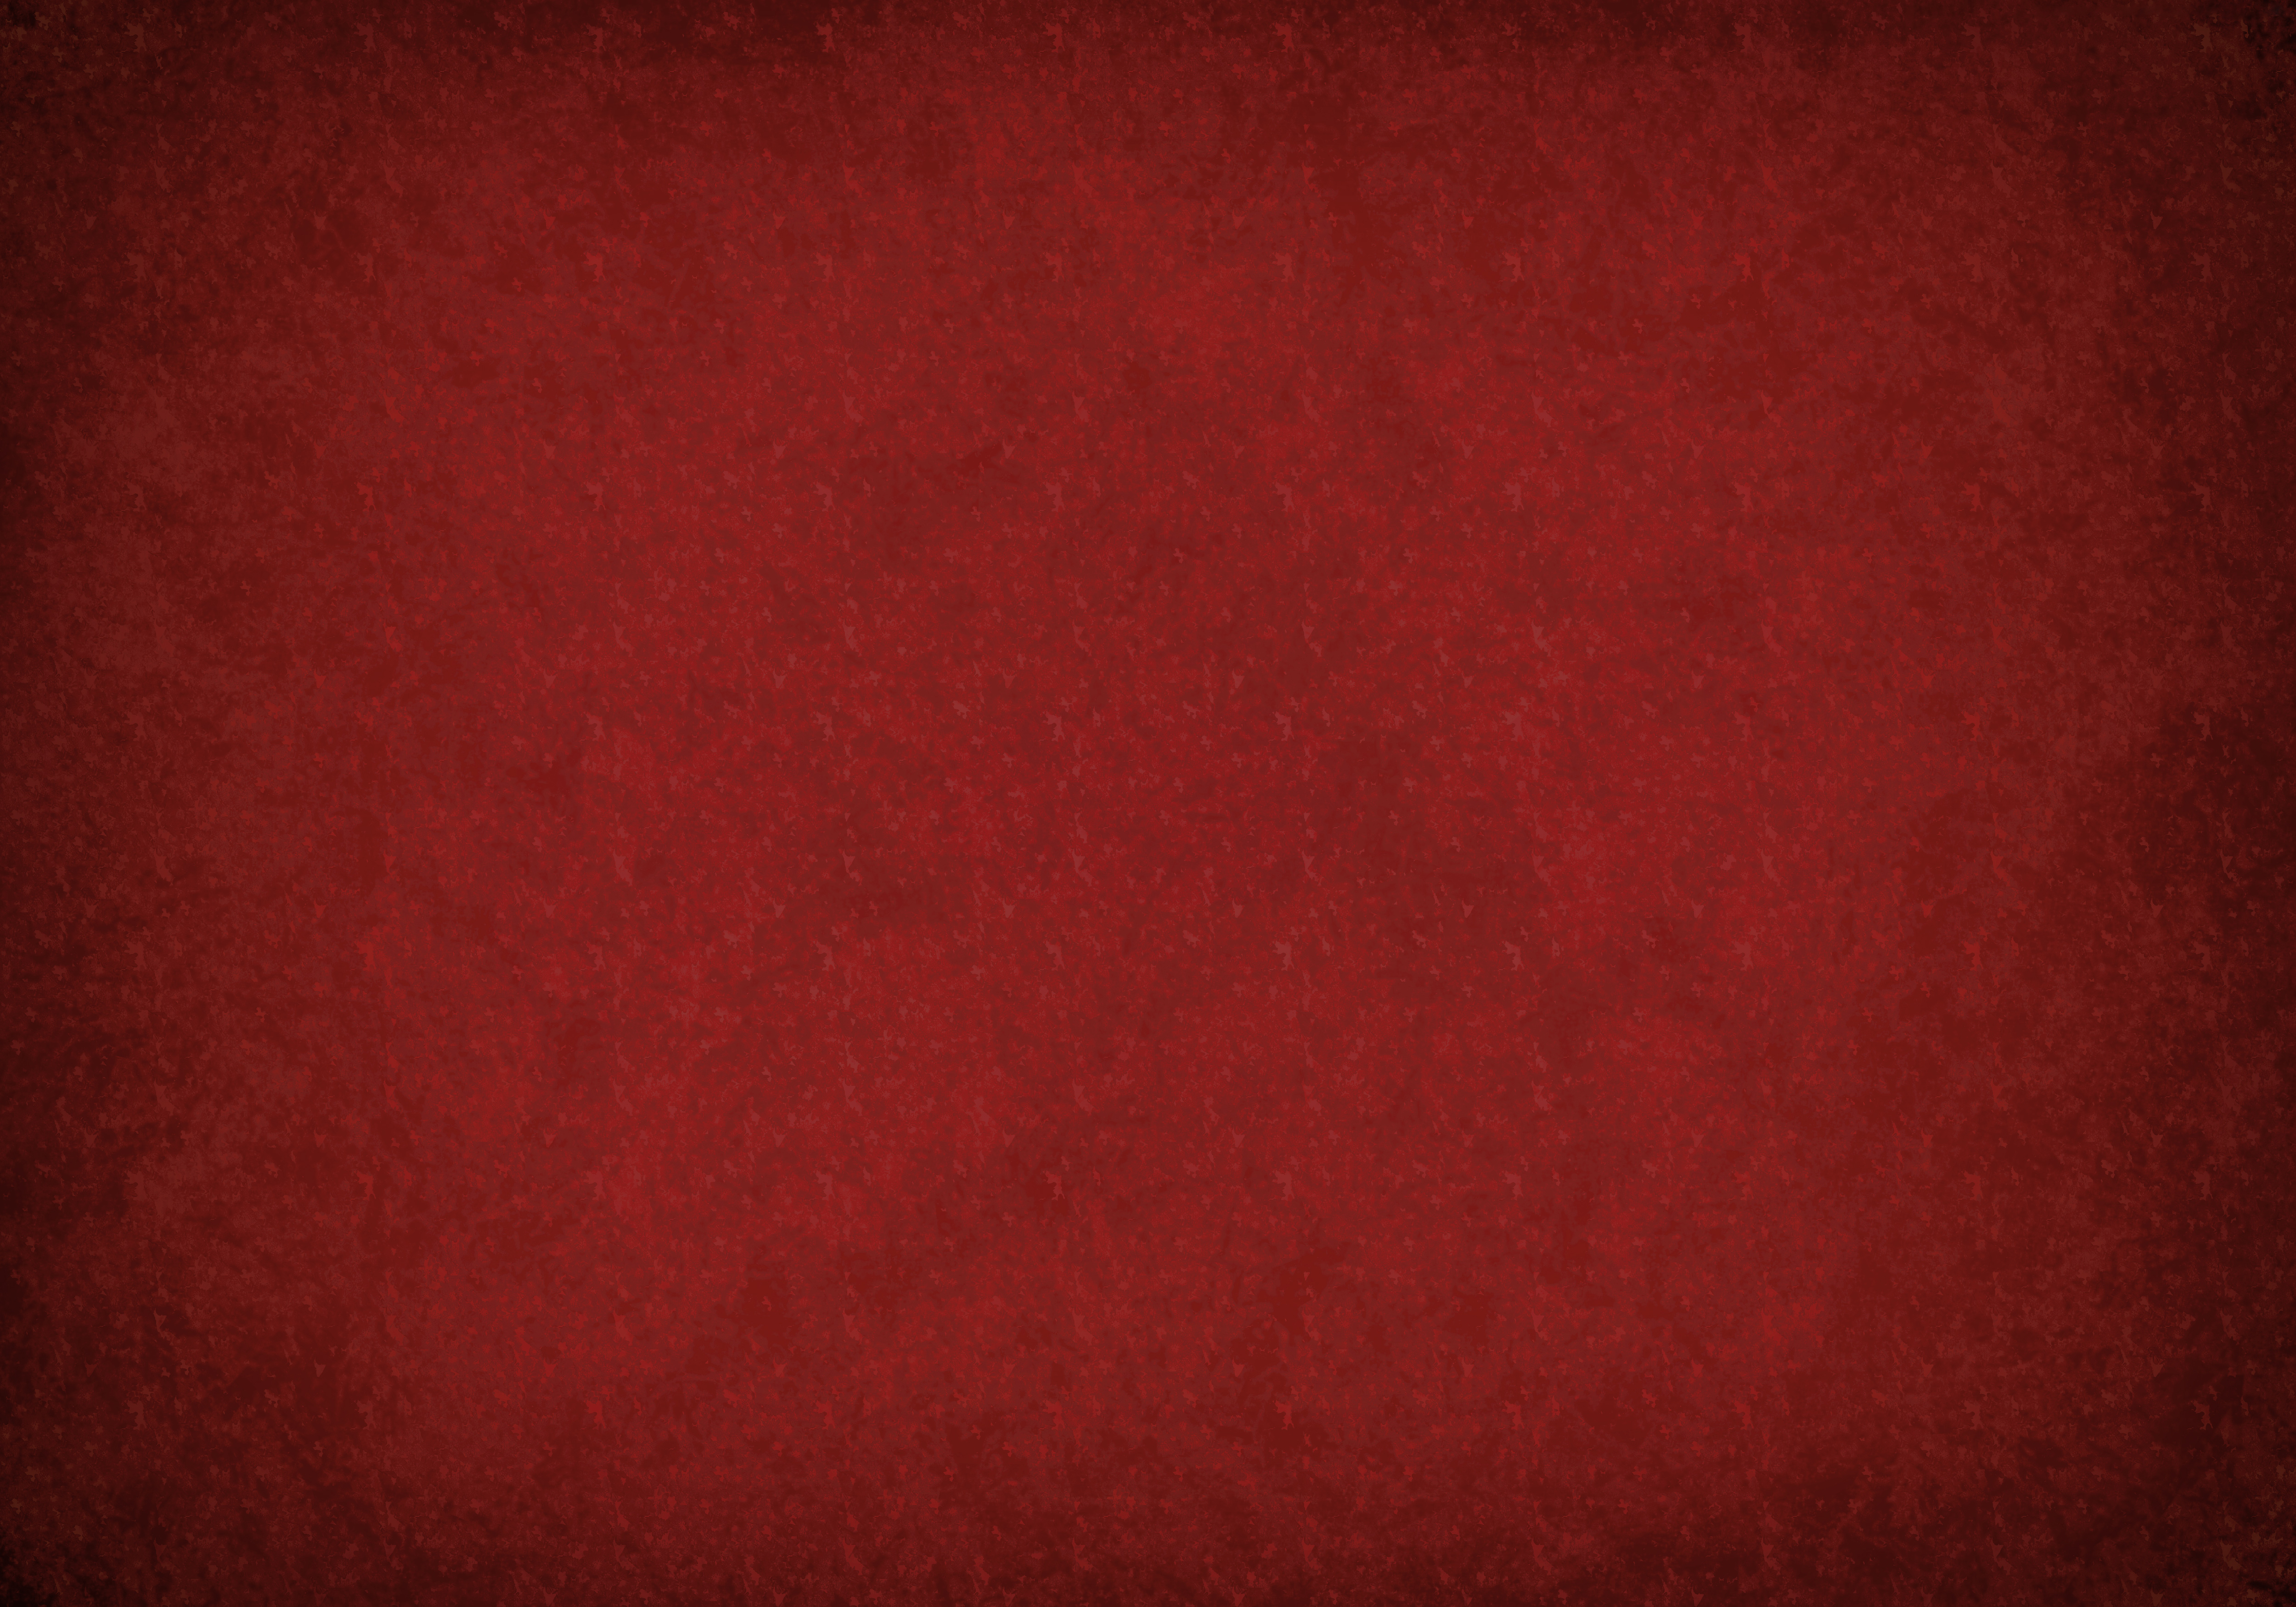 38 Red HD Wallpapers | Backgrounds - Wallpaper Abyss